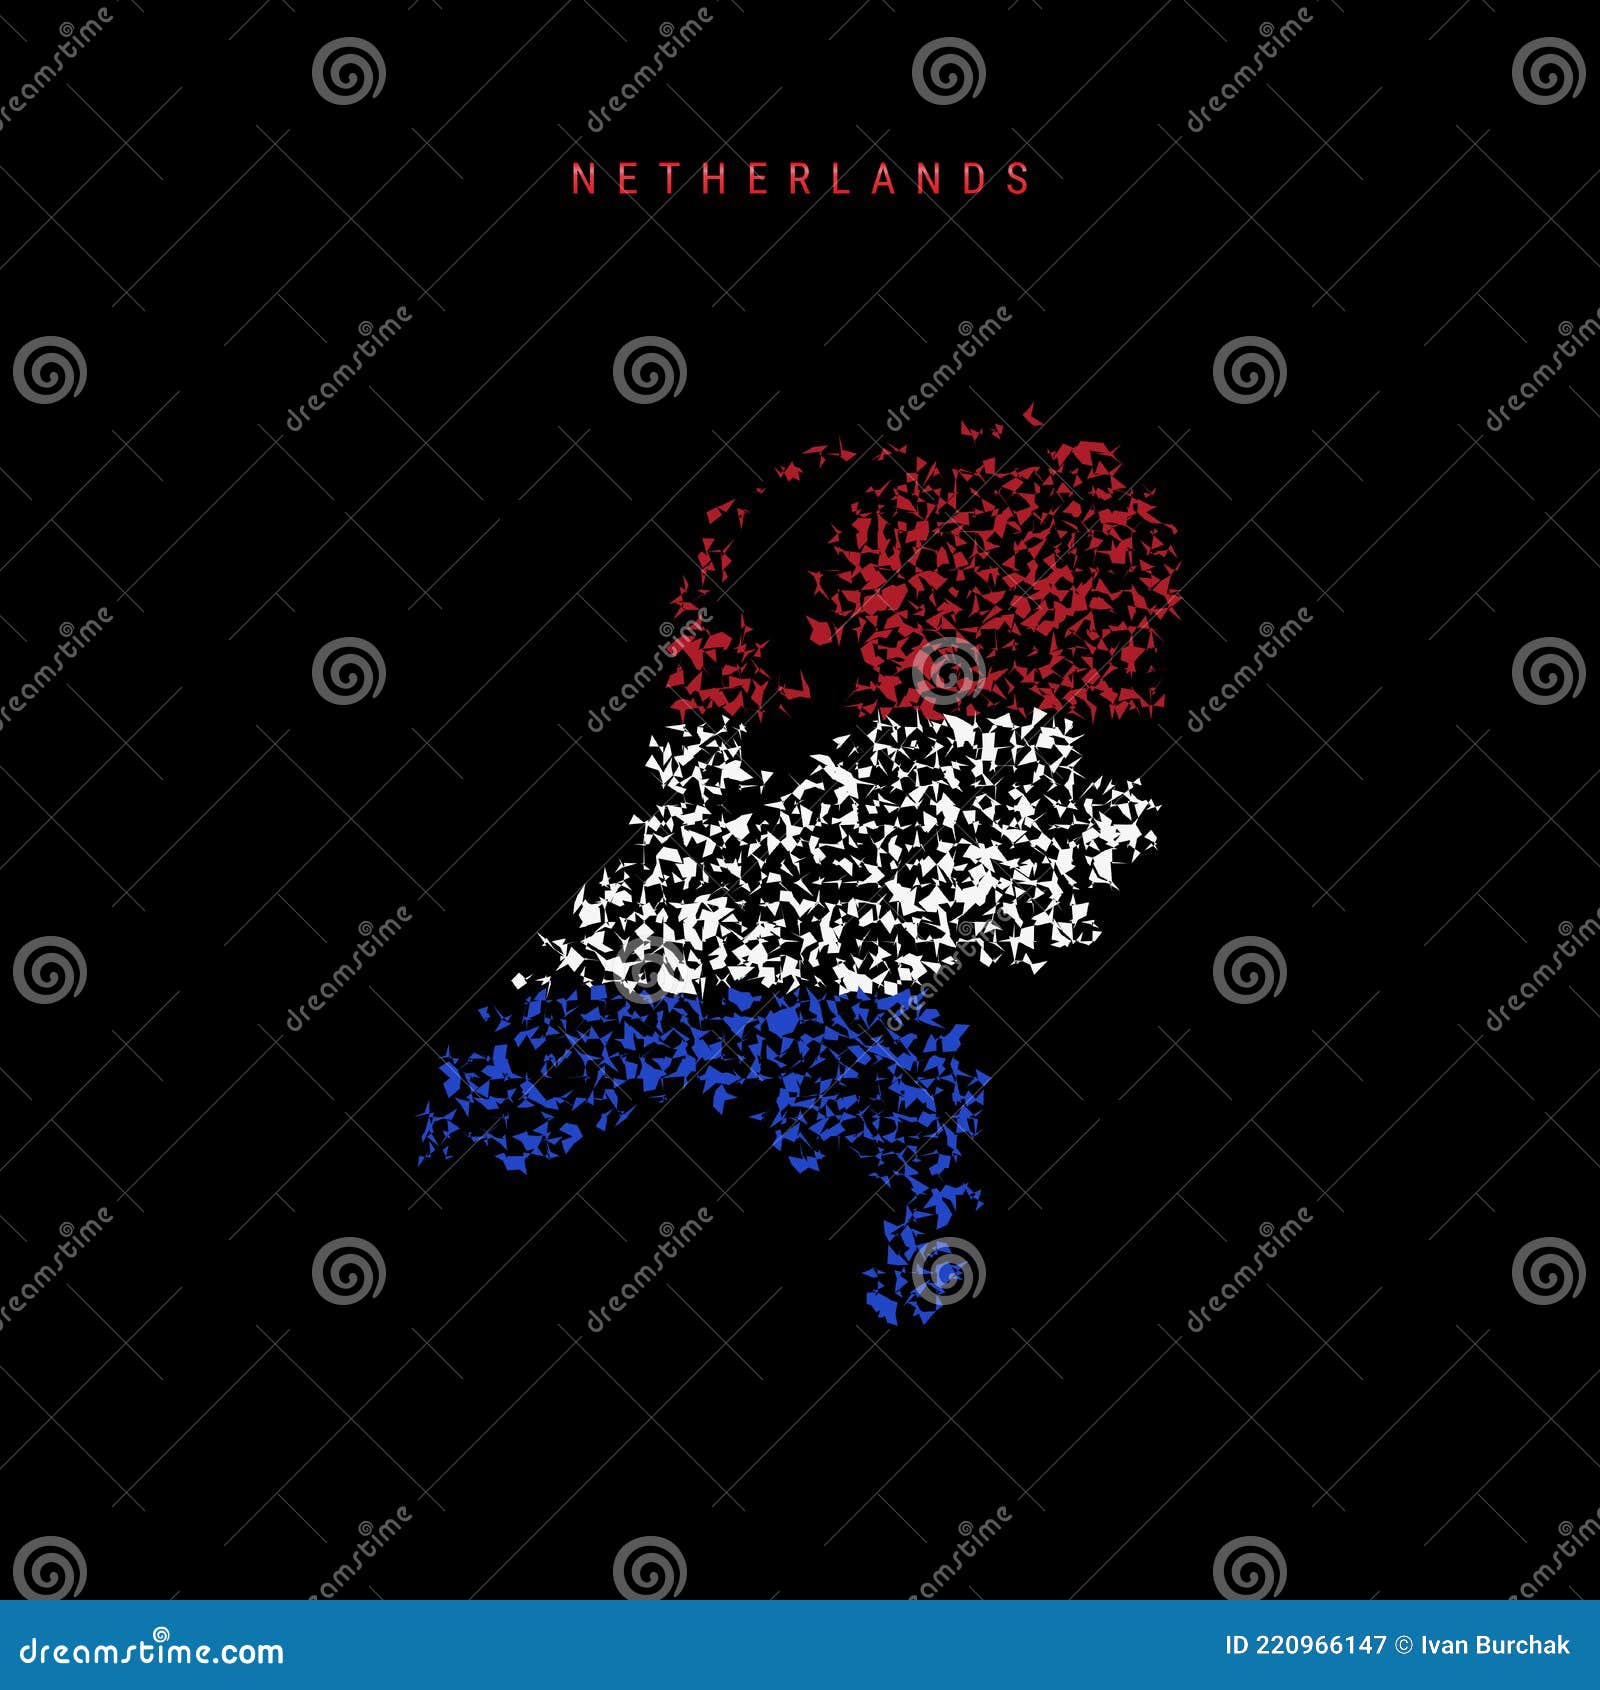 Netherlands Holland Flag Map Chaotic Particles Pattern In The Dutch Netherlandish Flag Colors